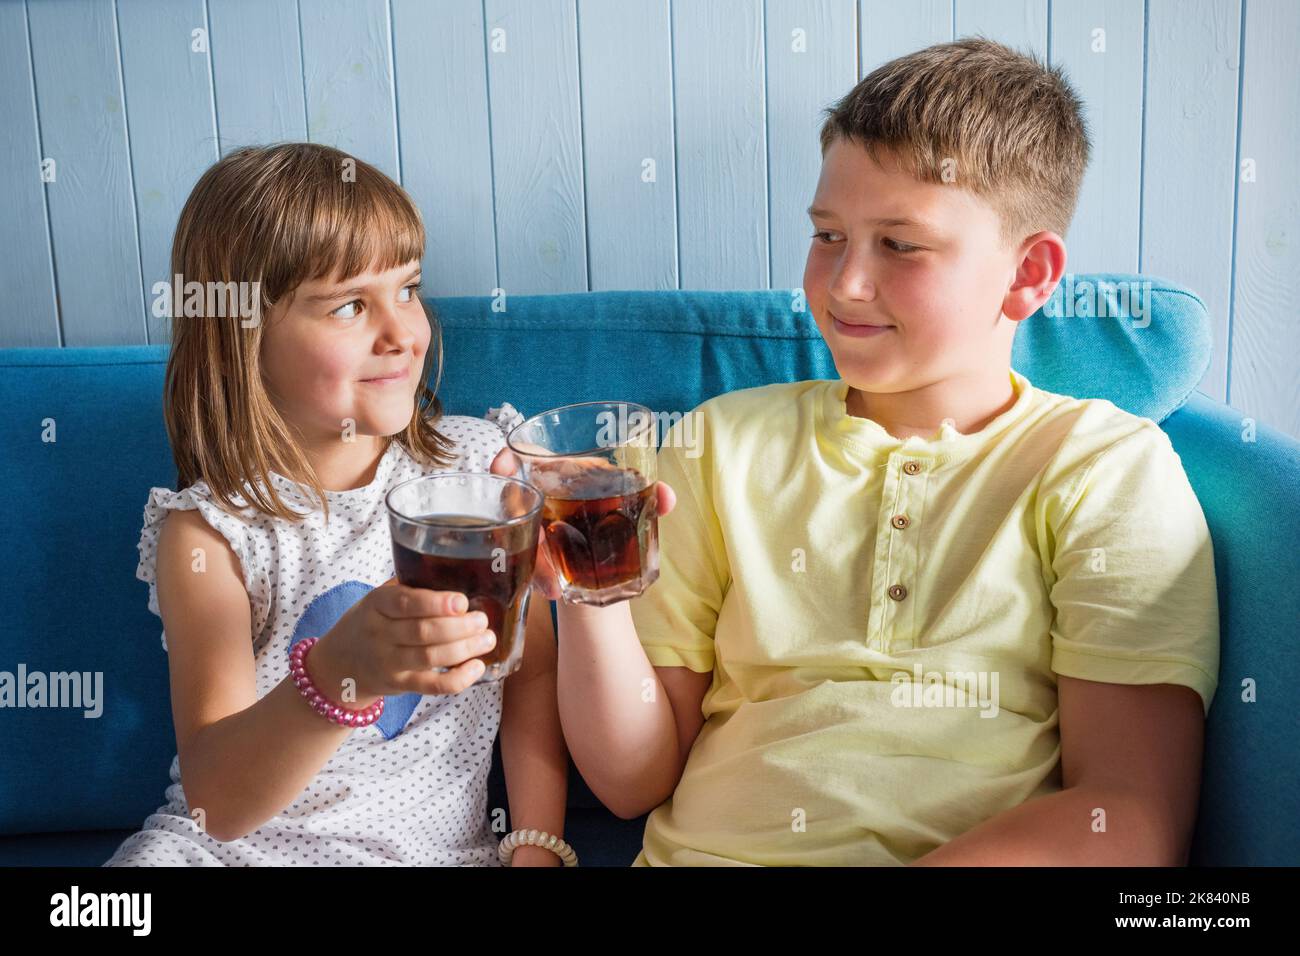 Children with cold, refreshing drinks in their hands. Soft drink Stock Photo